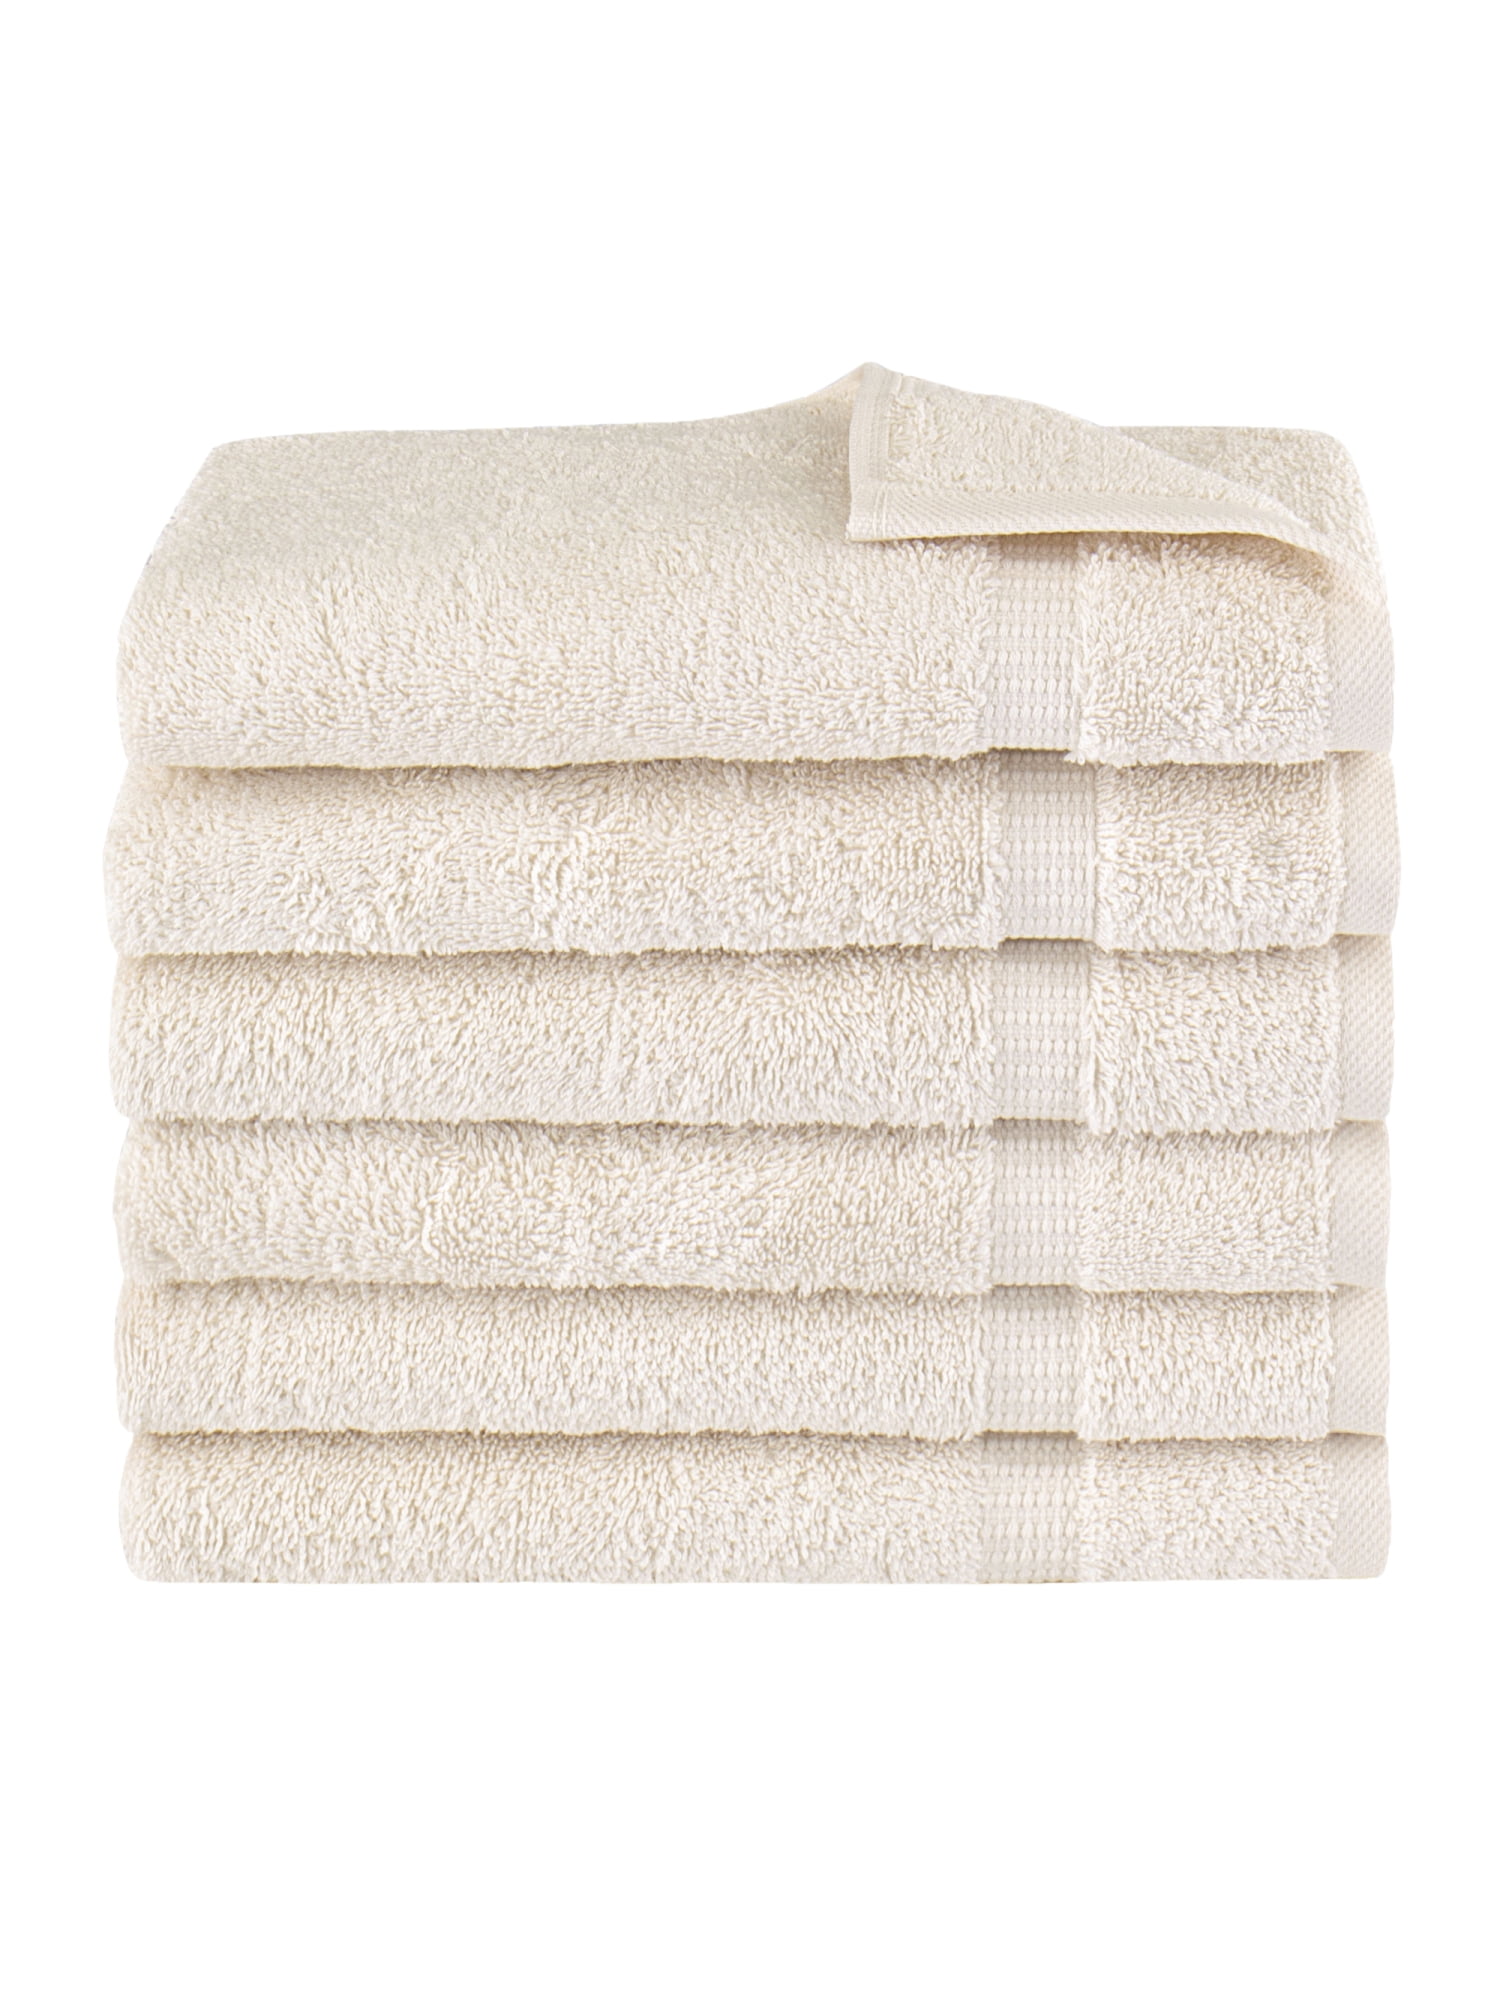 Classic Turkish Towels Royal Turkish Towels Villa Collection Hand Towel Pack of 6 Ivory, Size: 16 x 30, Beige